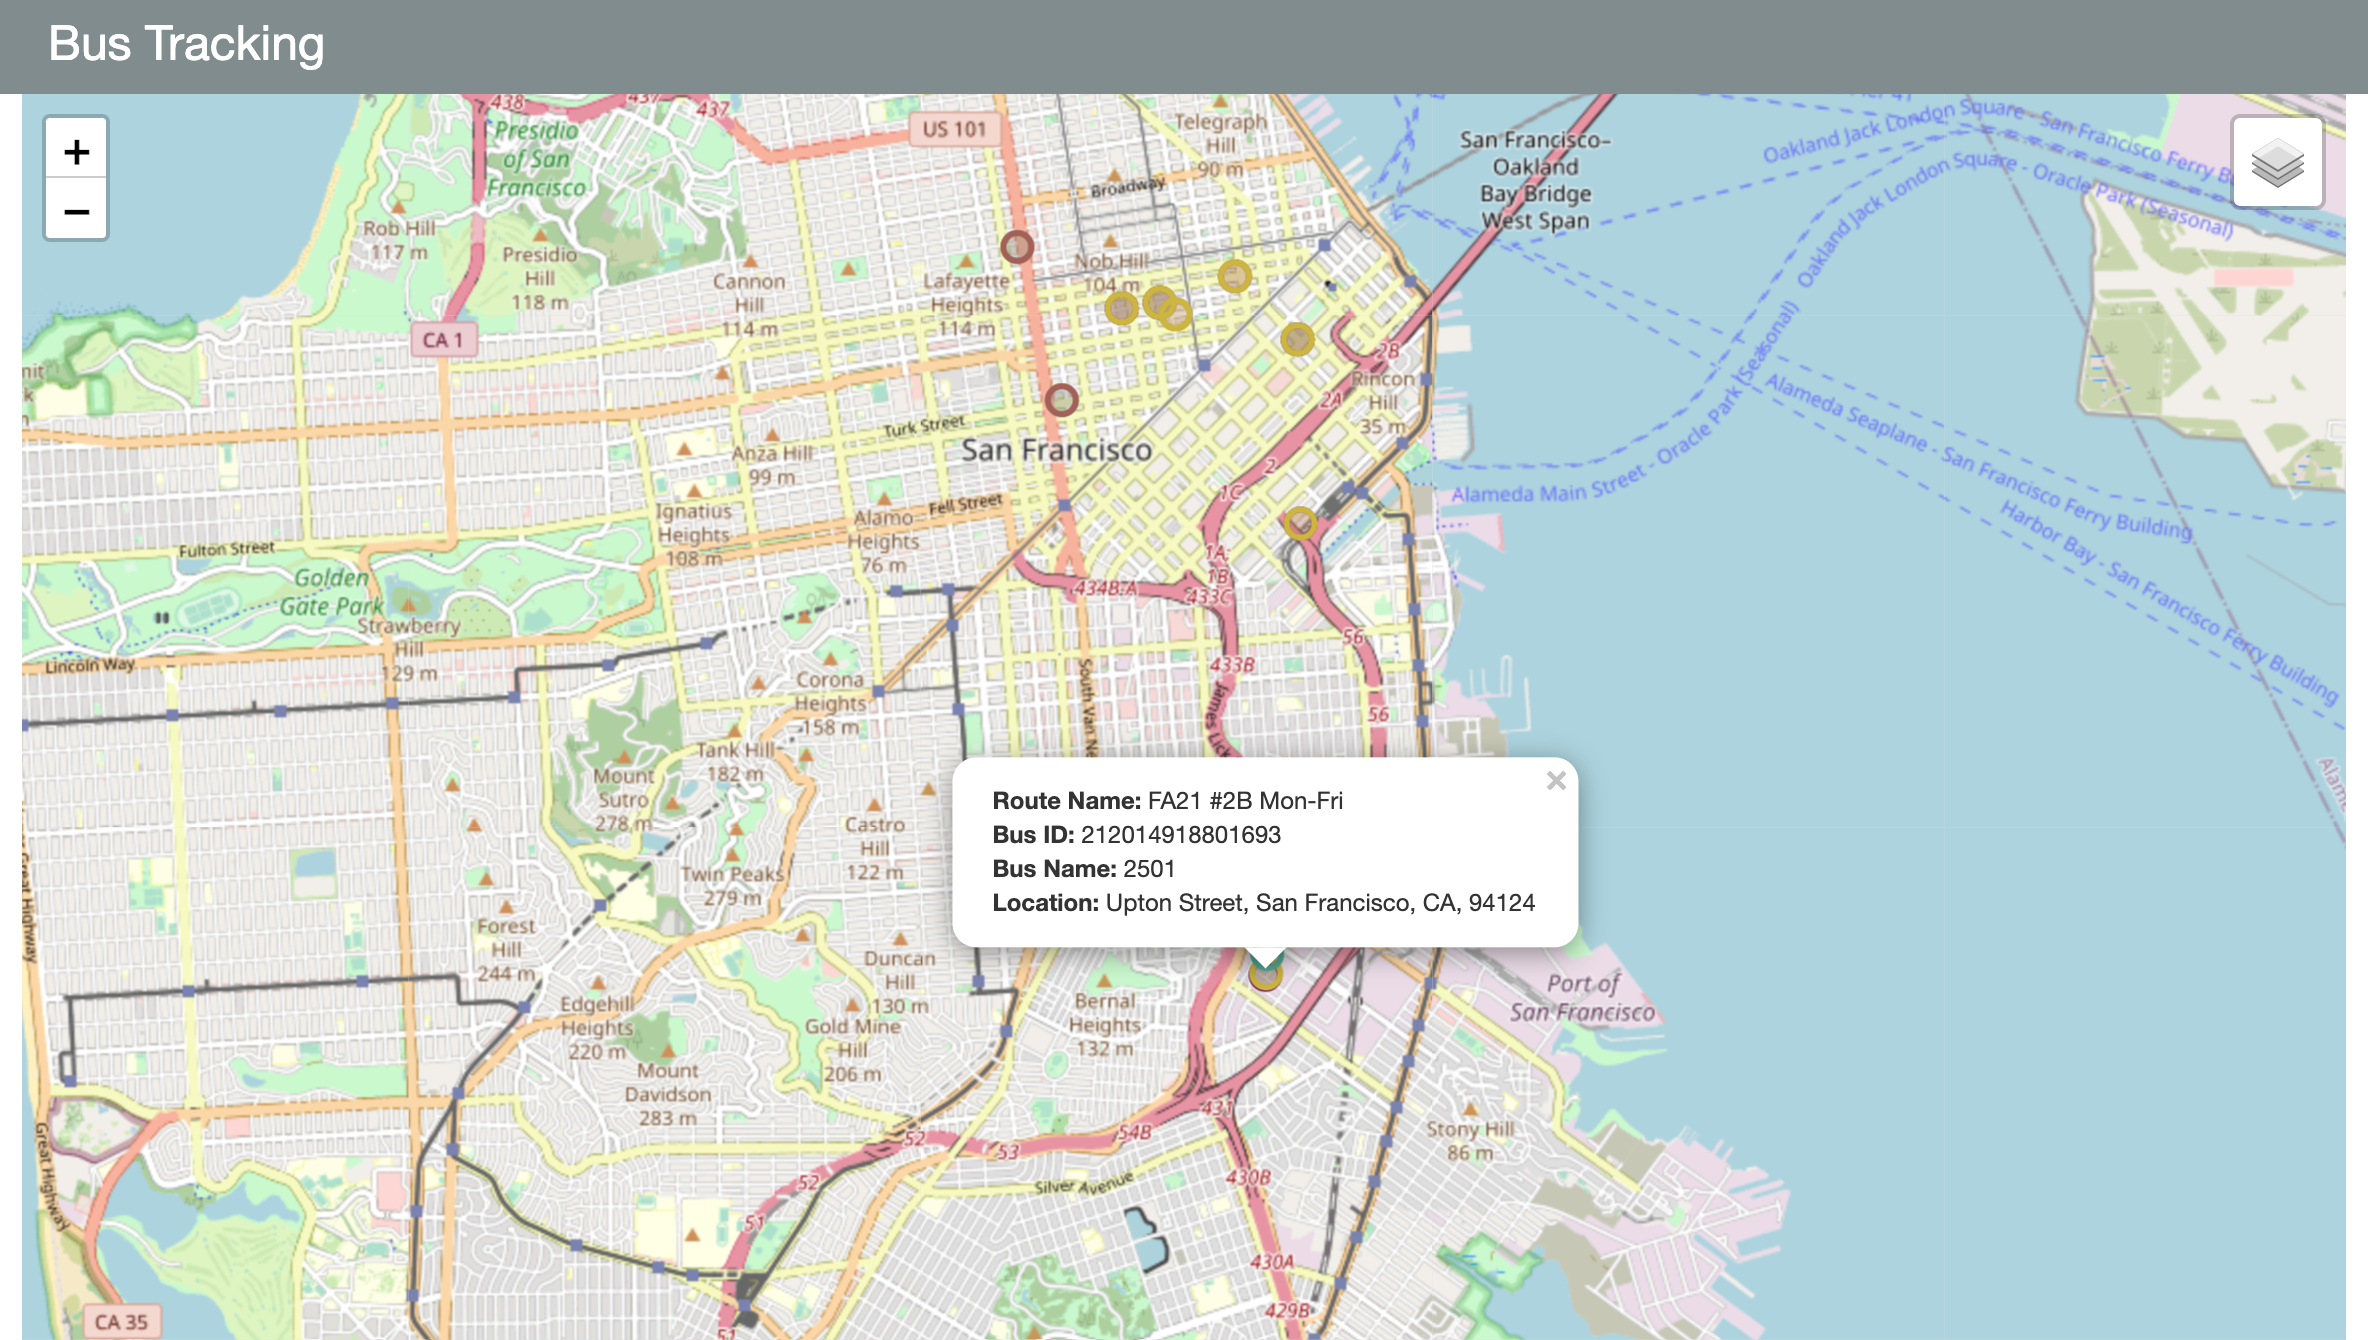 An example of a web view for bus tracking.